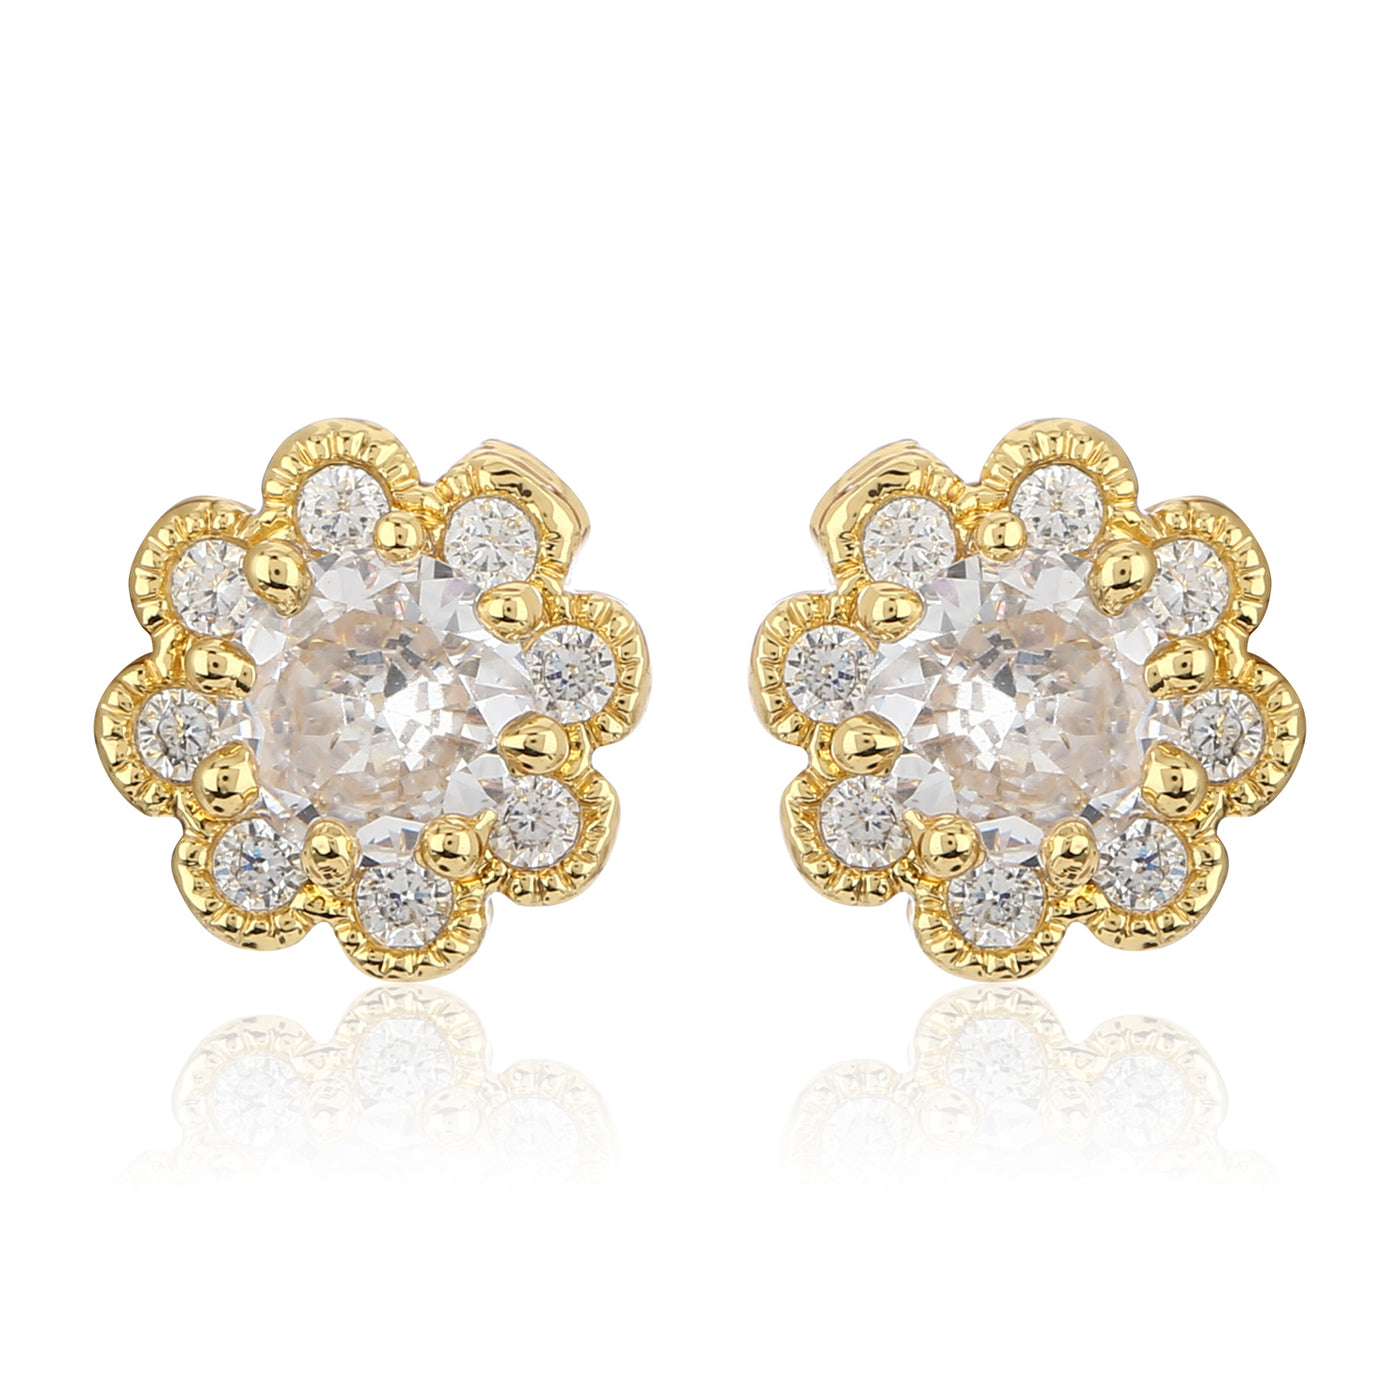 Gold Tone Plated White AD Stone Stud Earring